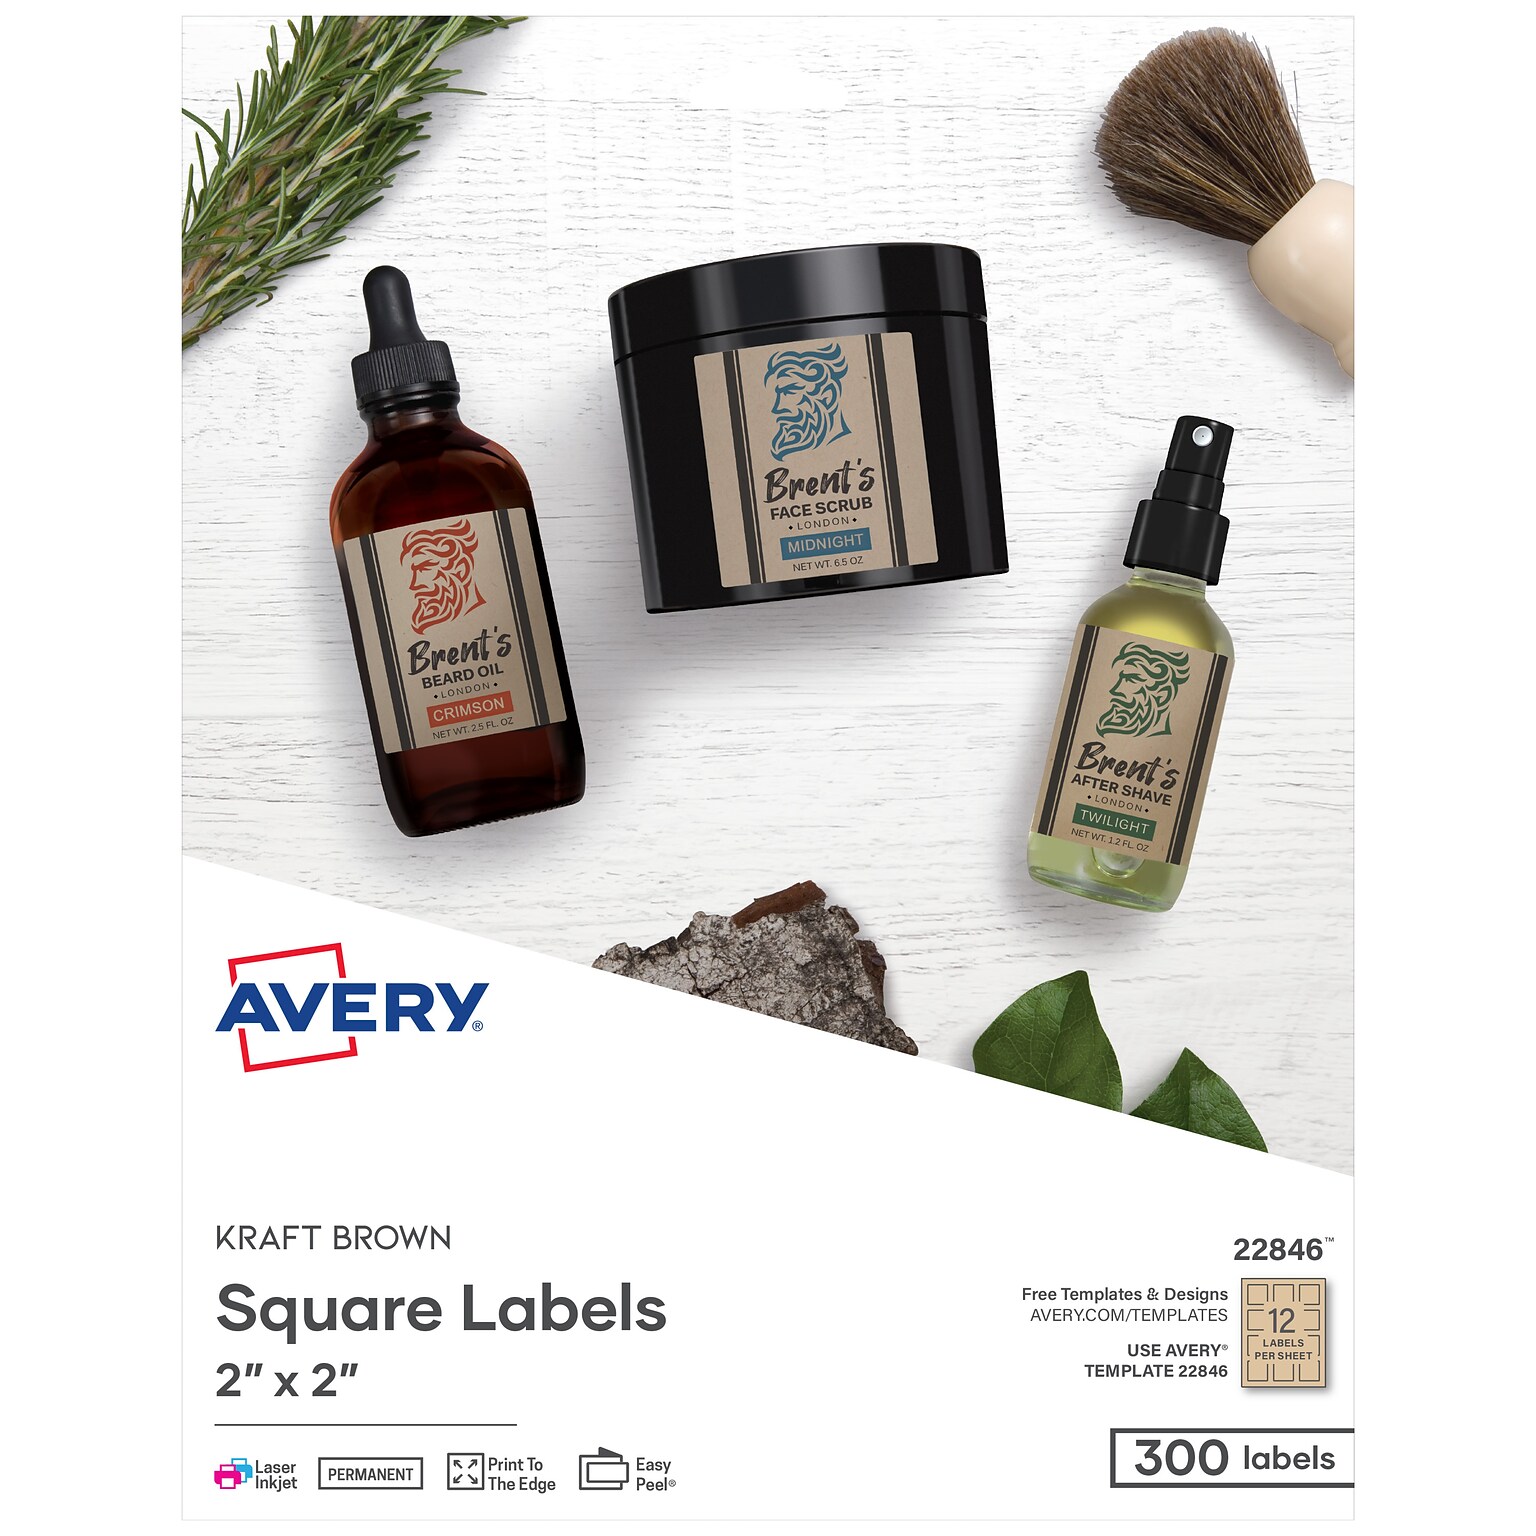 Avery Print-to-the-Edge Laser/Inkjet Labels, 2 x 2, Kraft Brown, 12 Labels/Sheet, 25 Sheets/Pack, 300 Labels/Pack (22846)